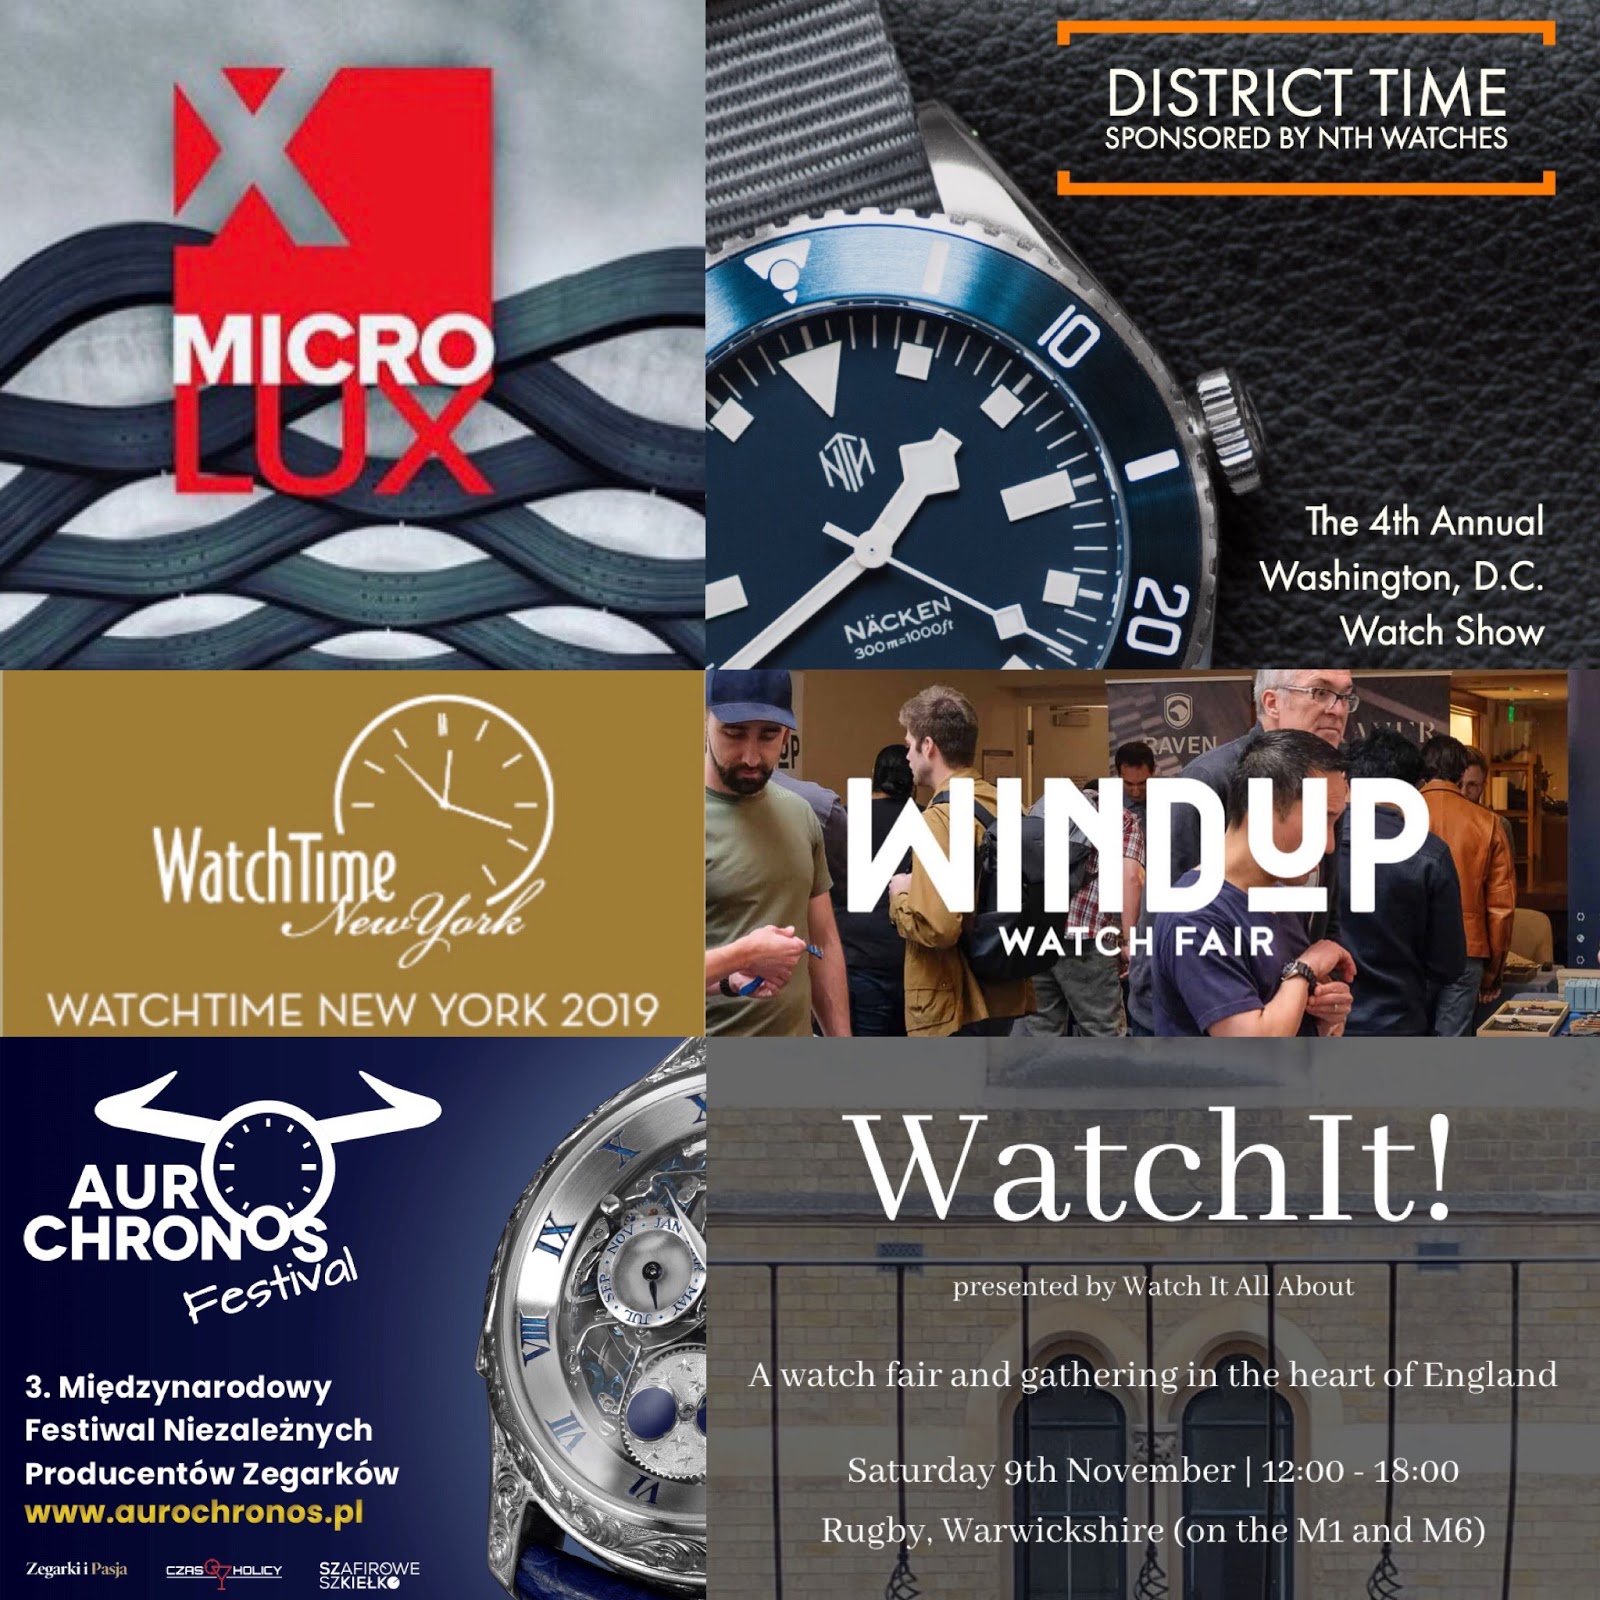 Fall 2019 Watch Shows